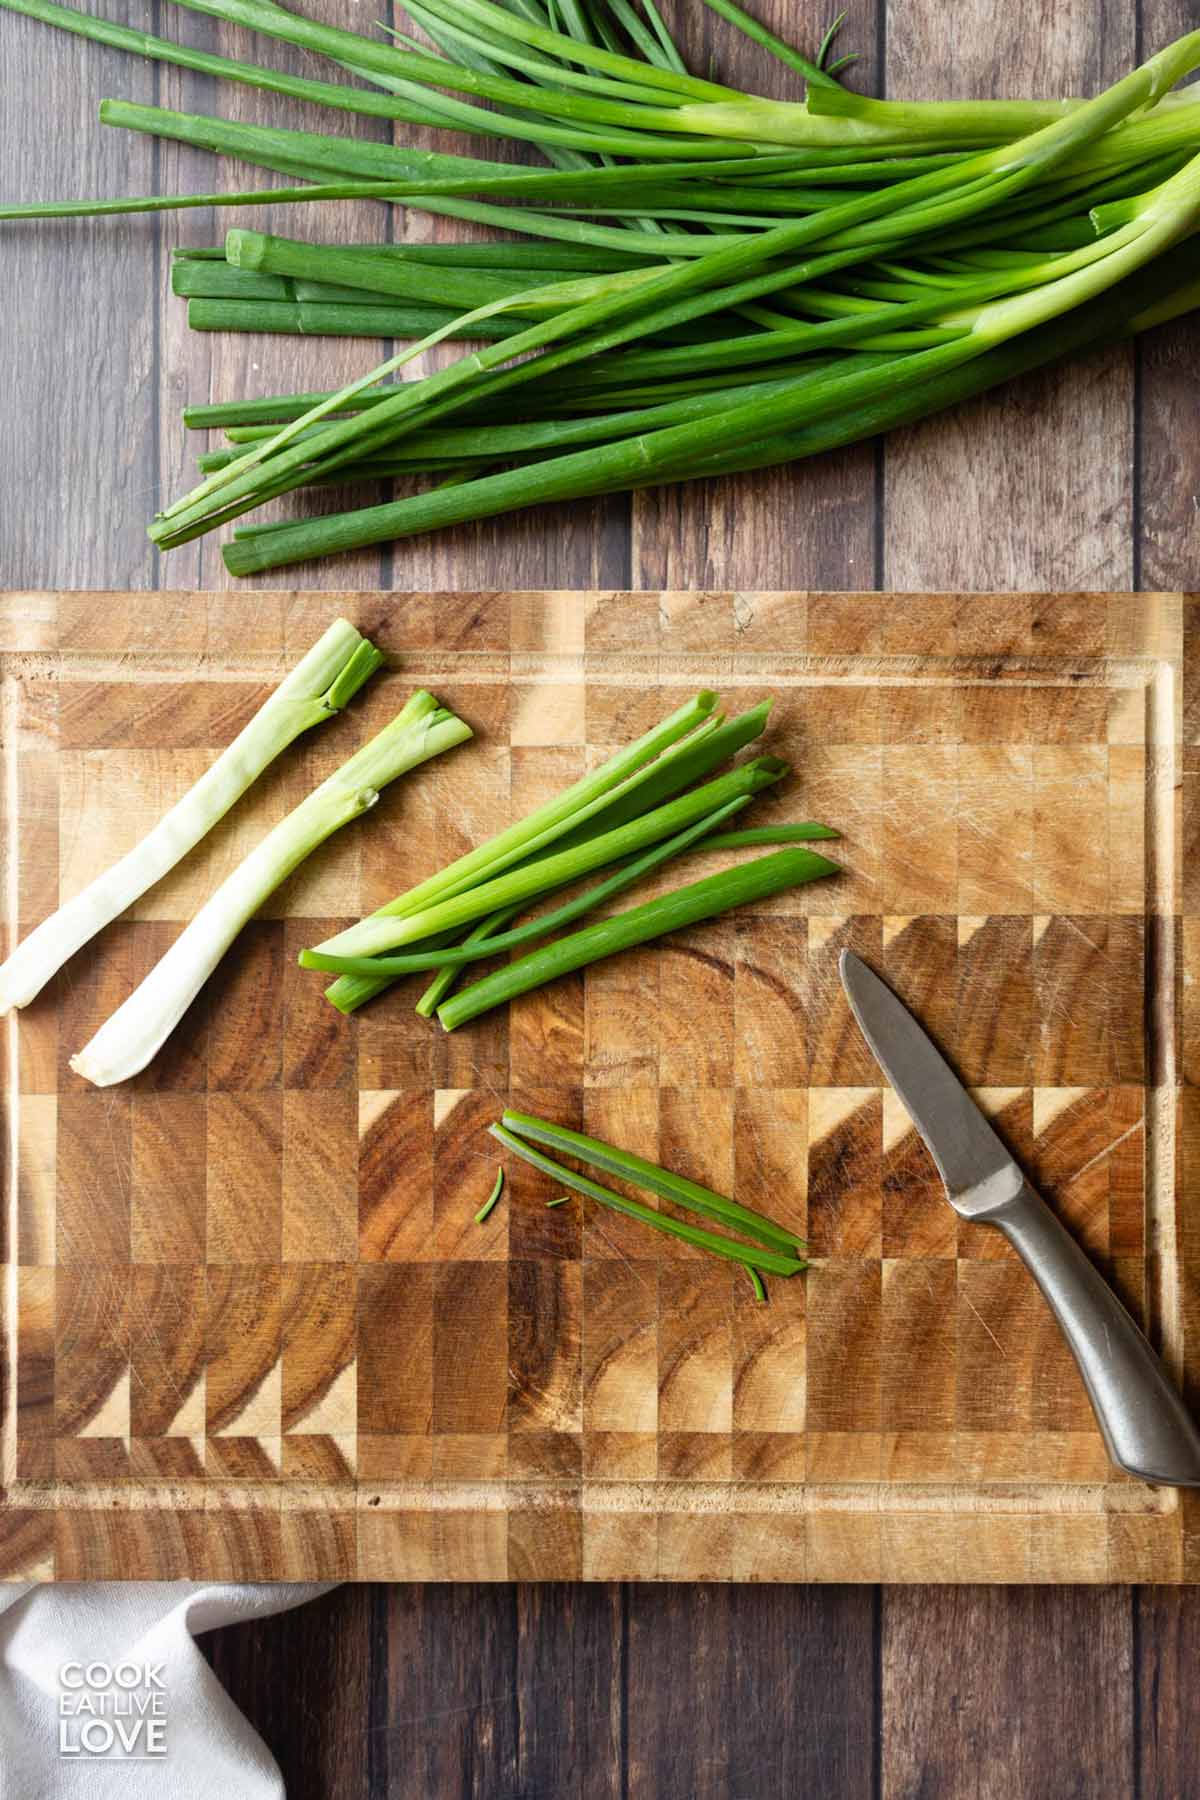 Green tops cut into thin slices.